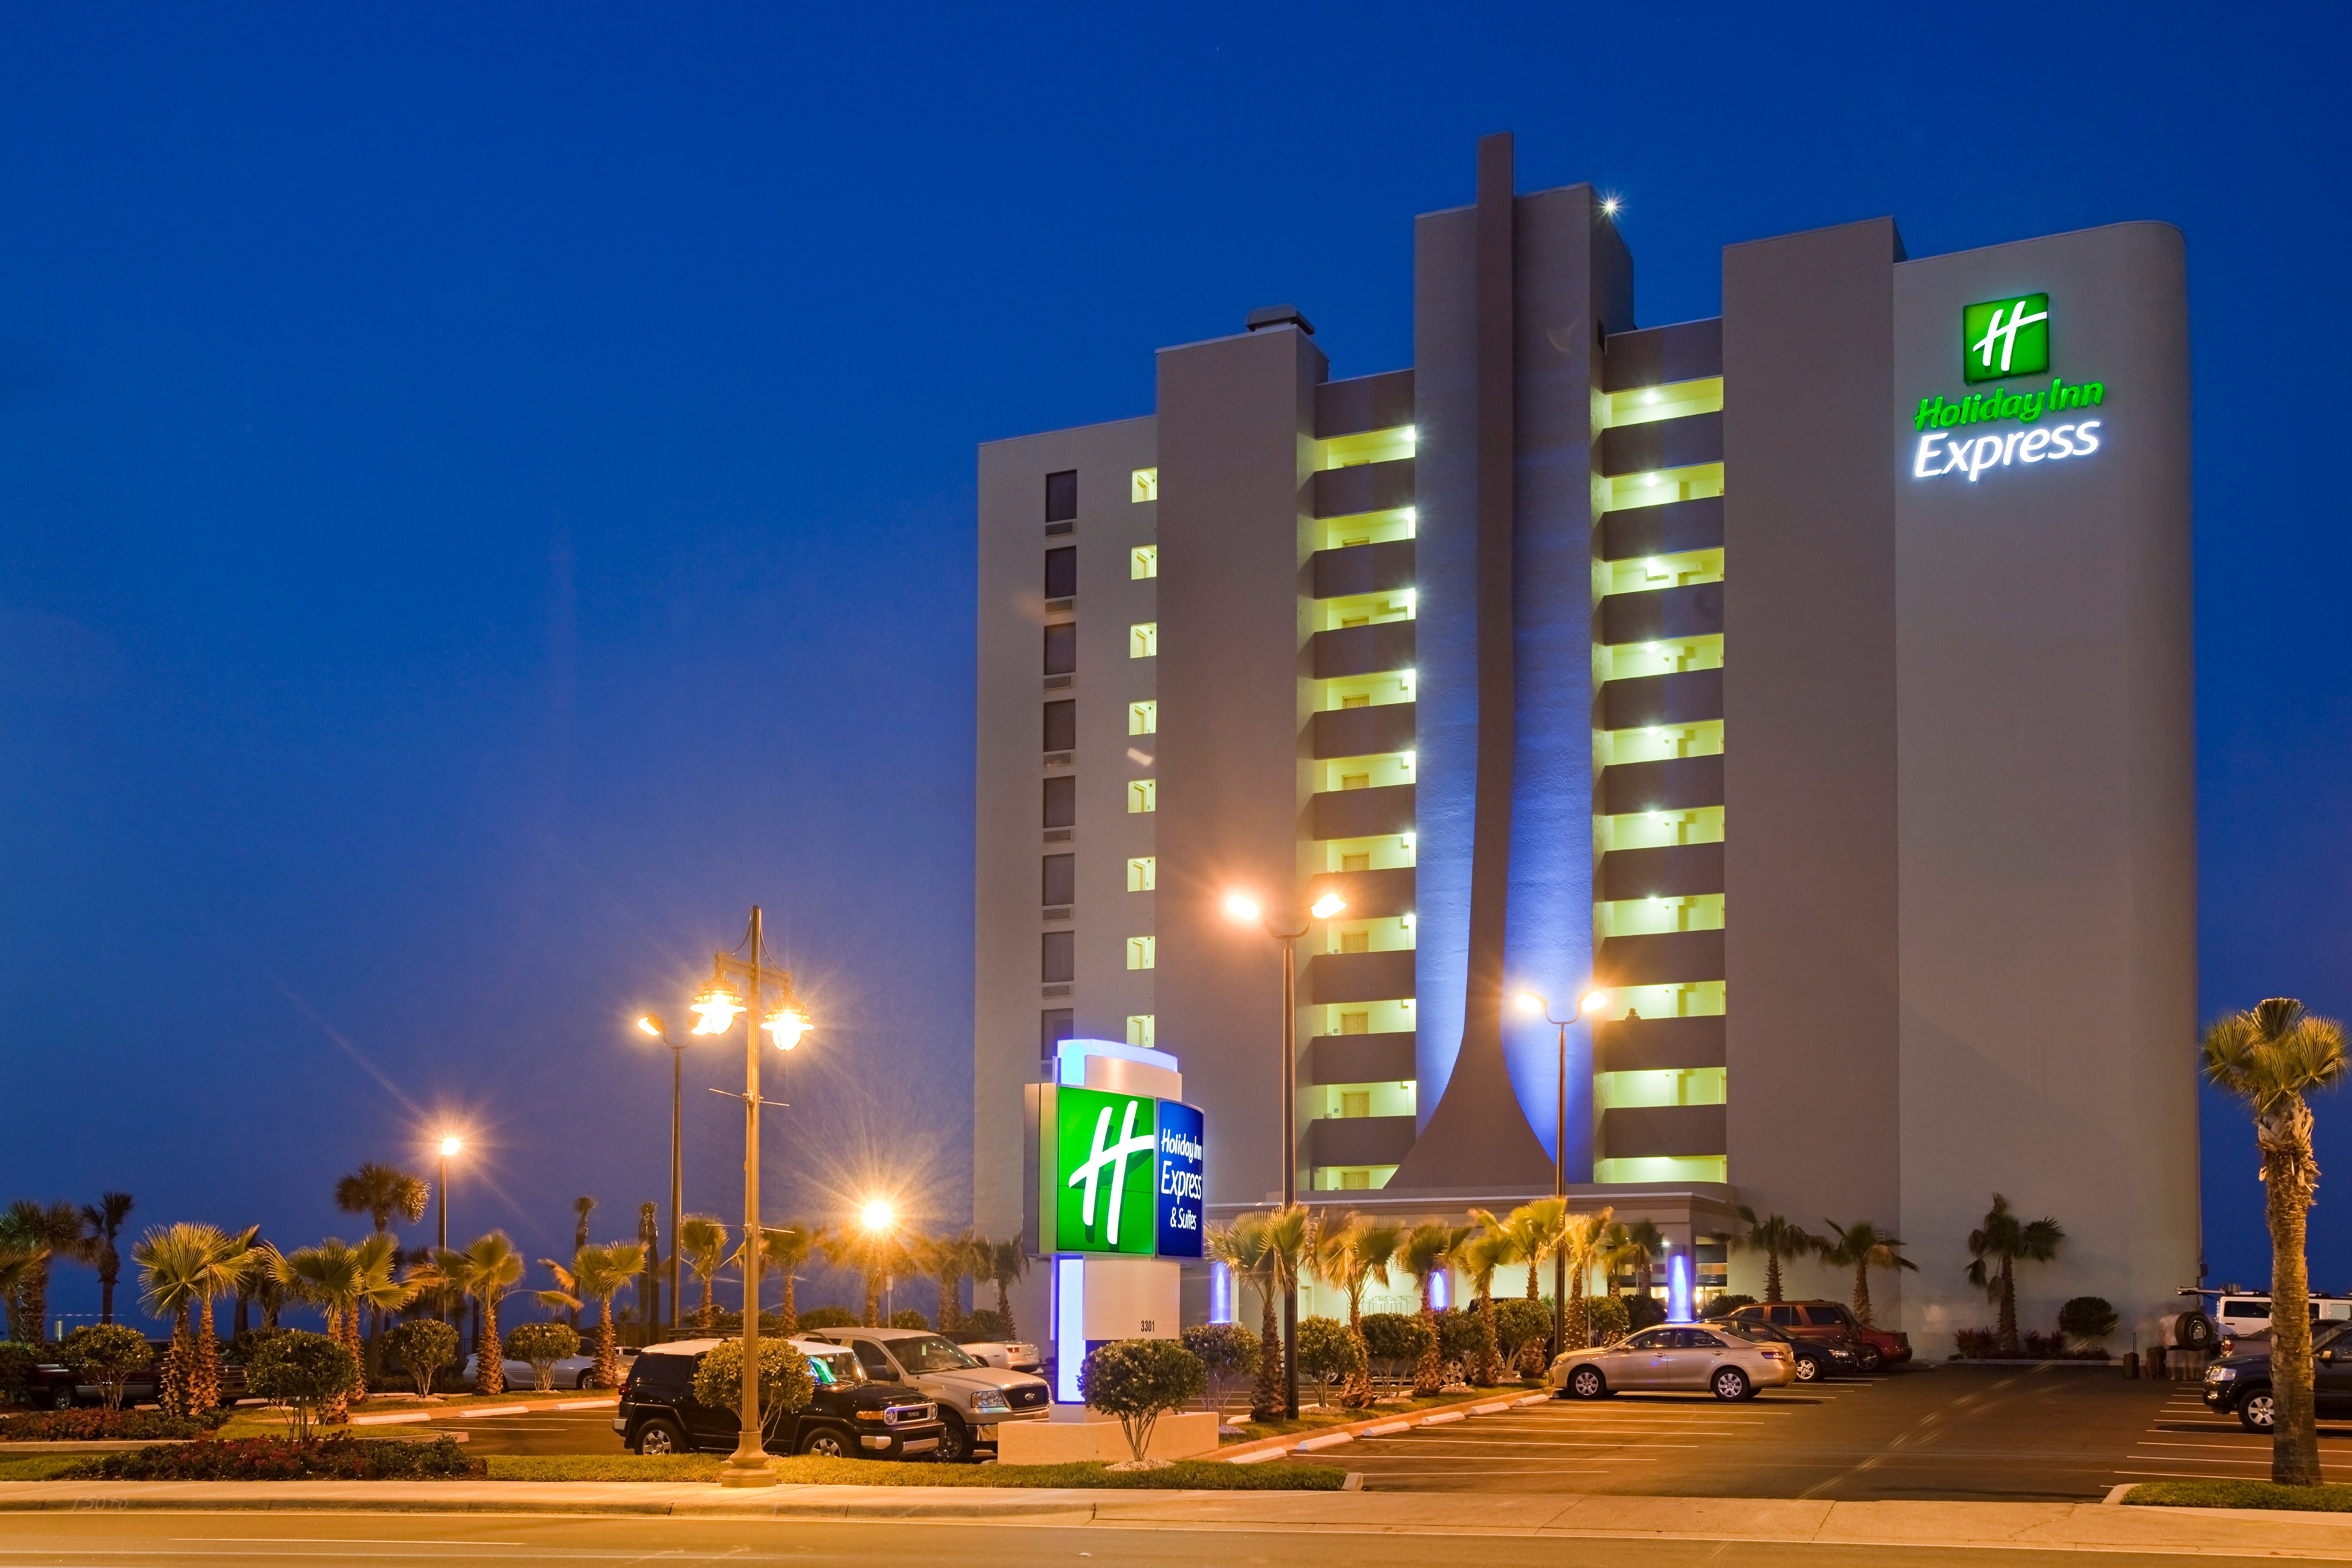 Welcome to our Daytona Beach Shores hotel!